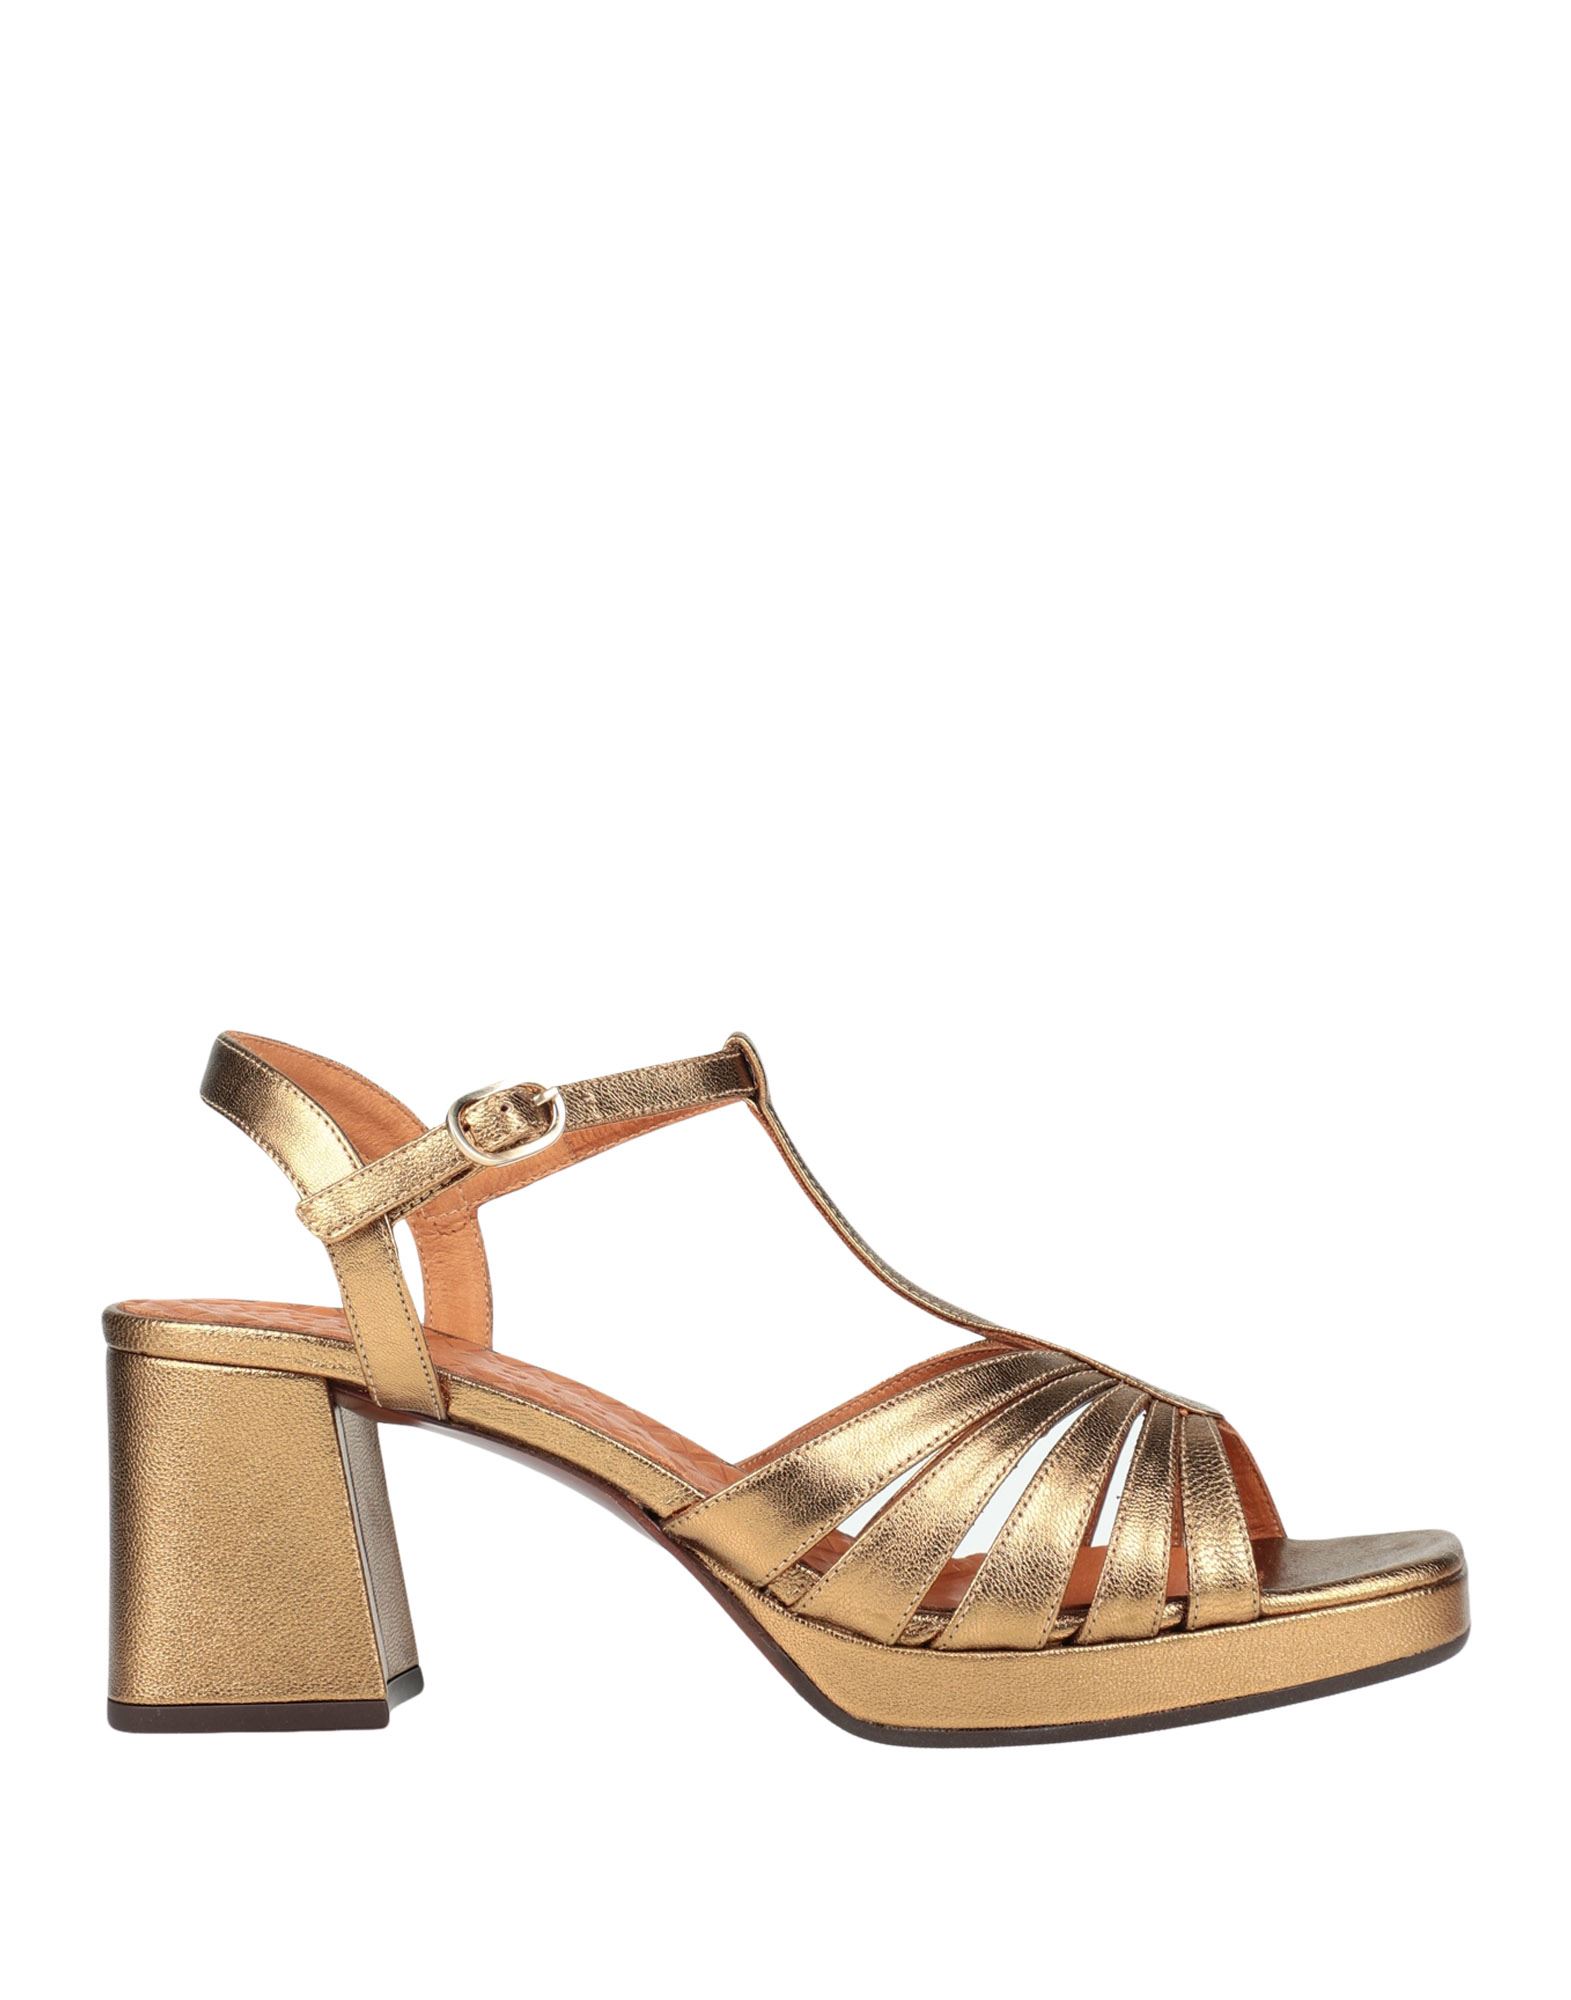 Chie Mihara Sandals In Gold | ModeSens